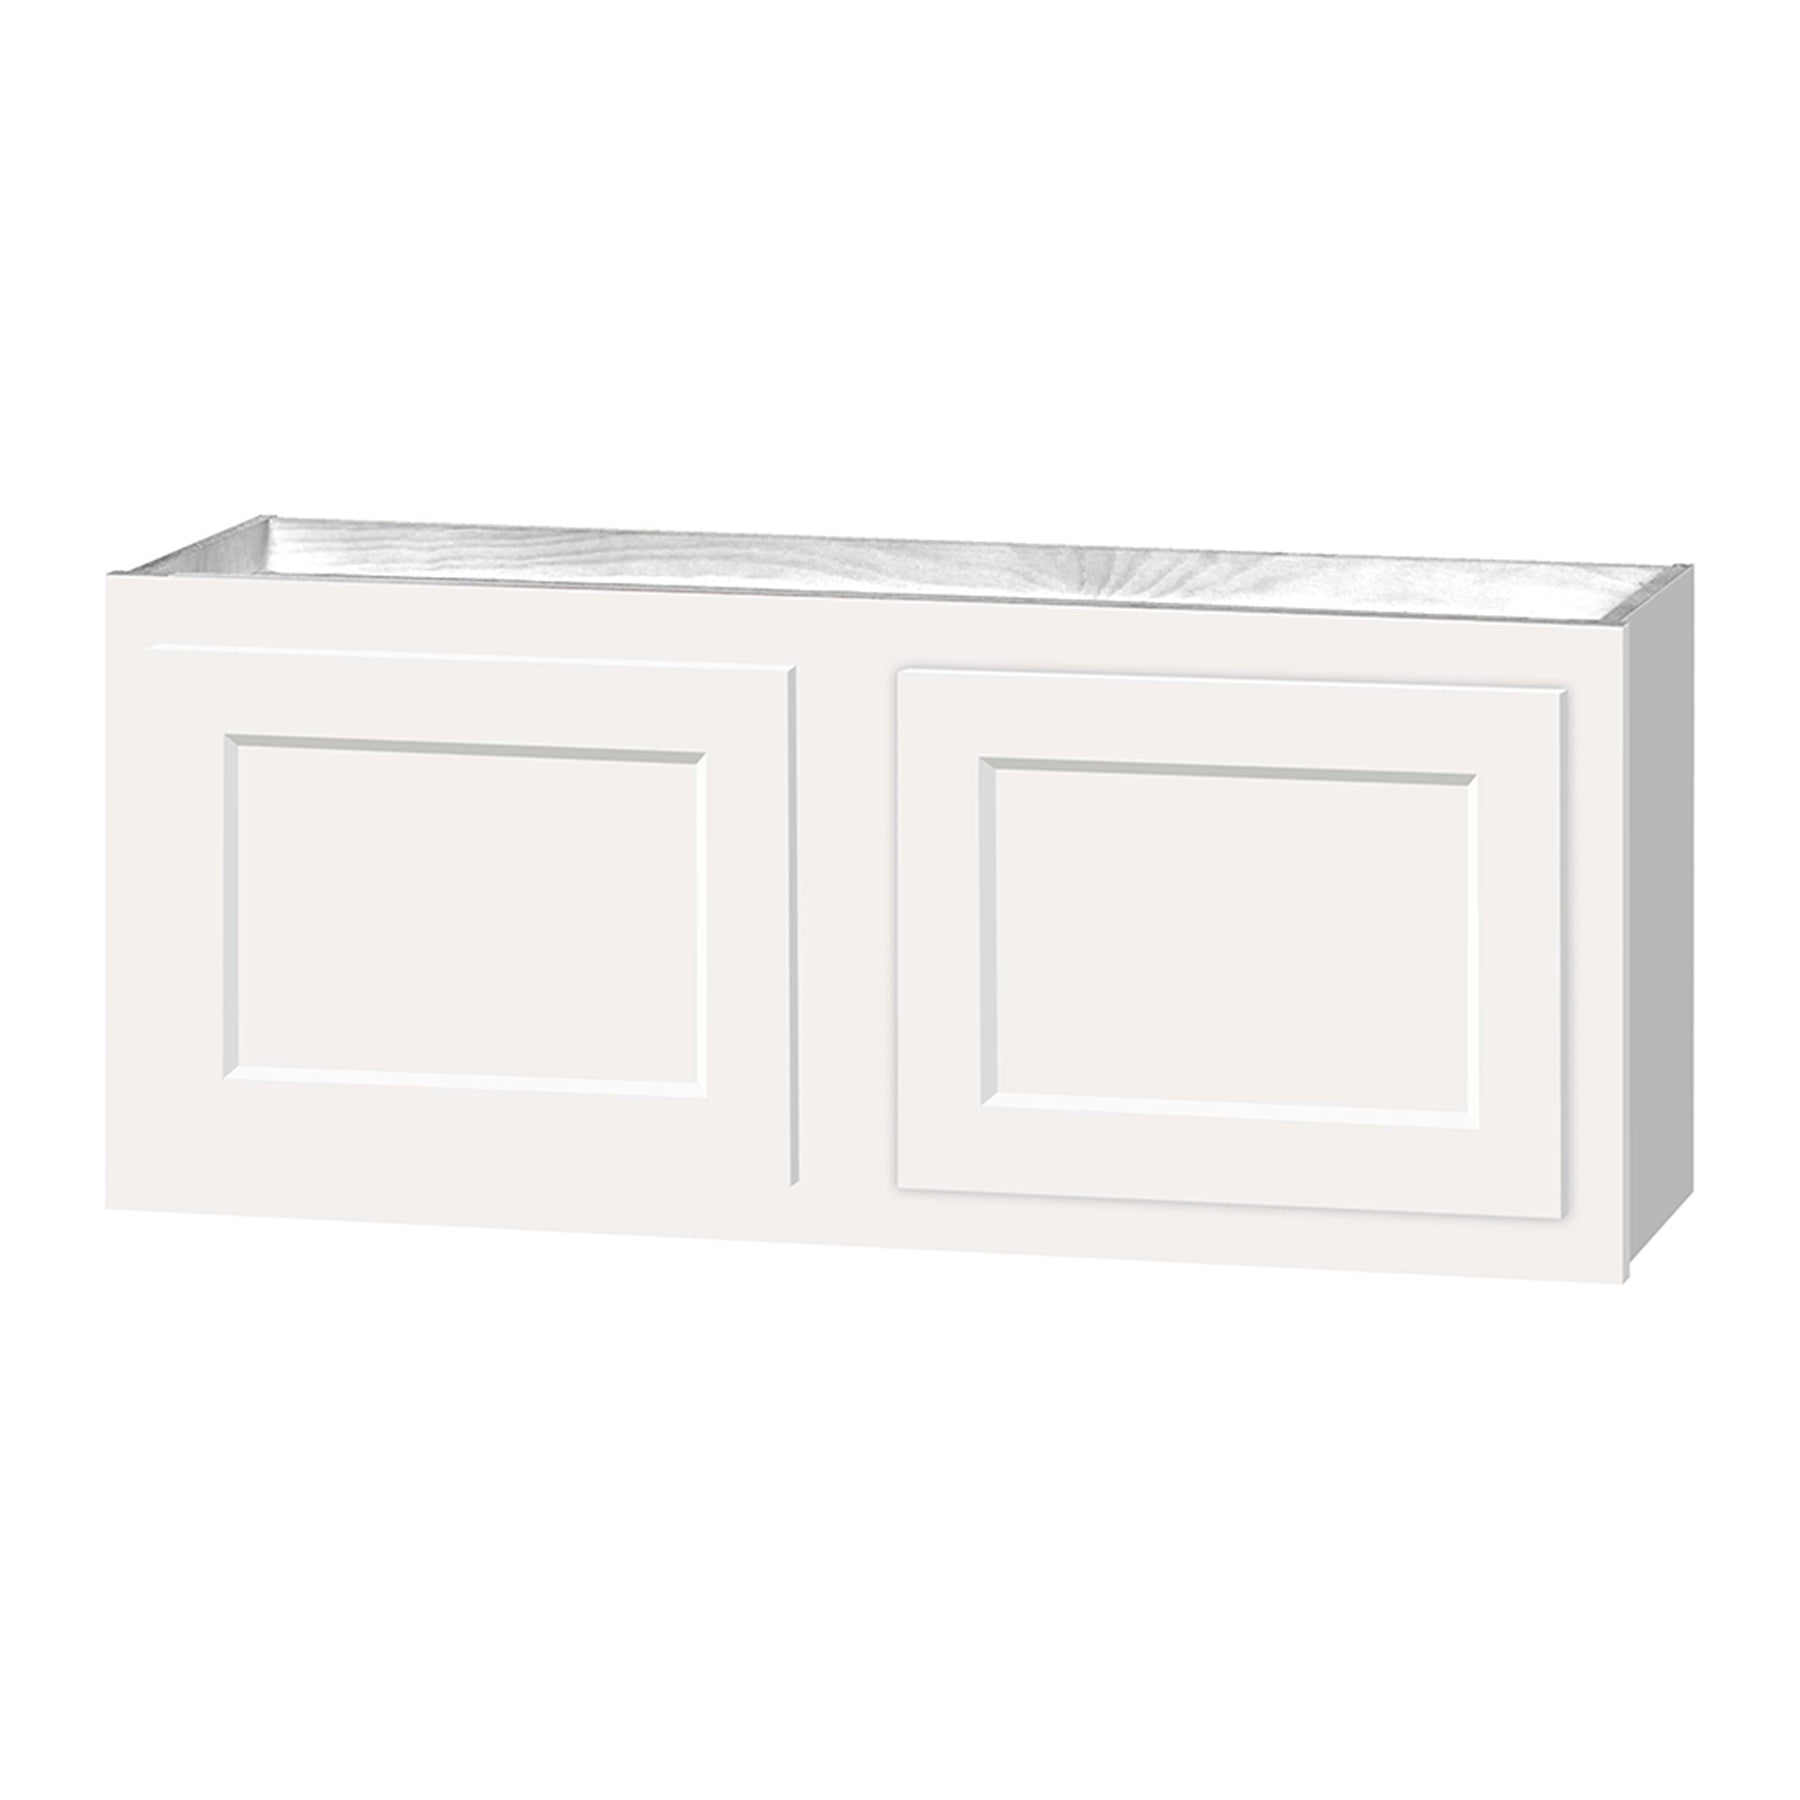 15 inch Wall Cabinets - Dwhite Shaker - 36 Inch W x 15 Inch H x 12 Inch D